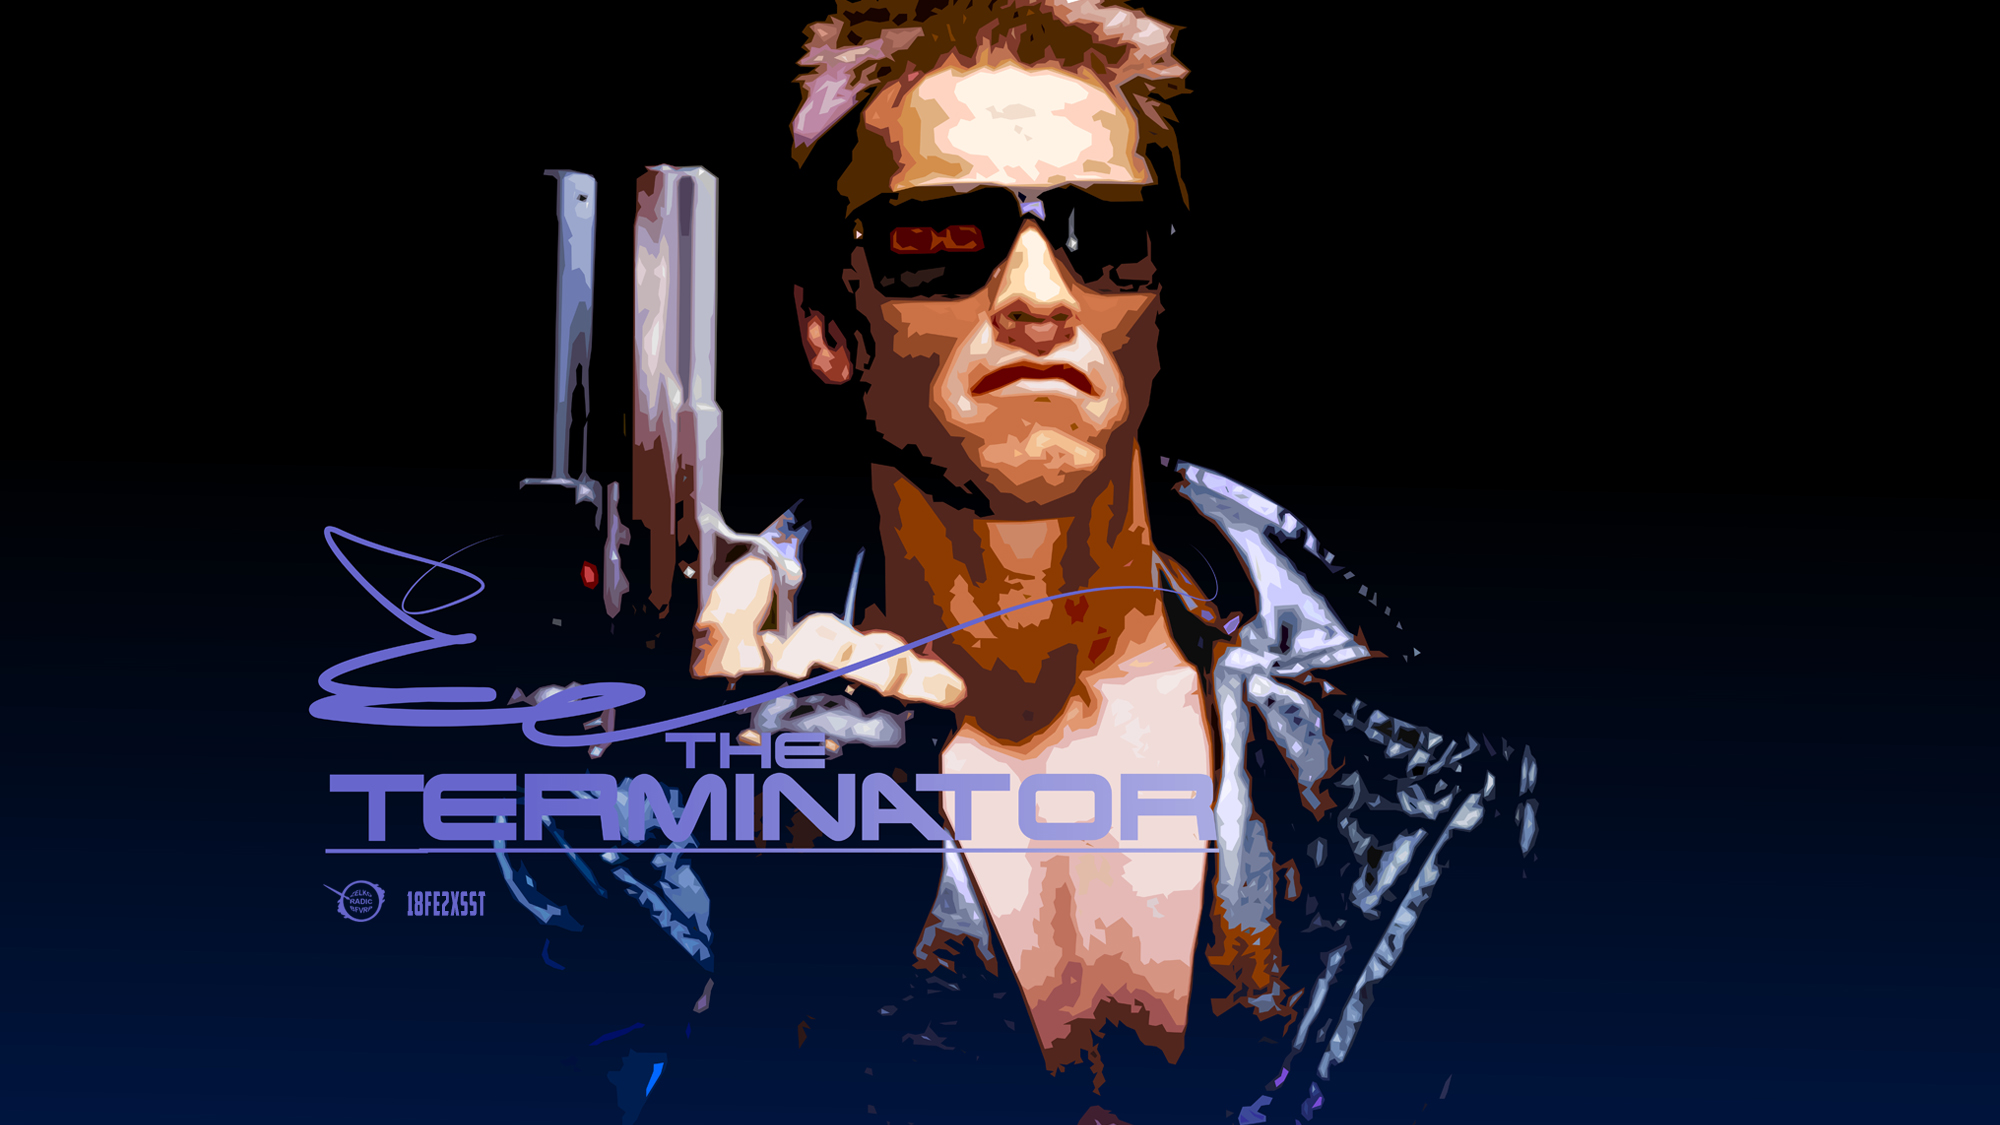 Terminator HD Wallpaper and Background Image